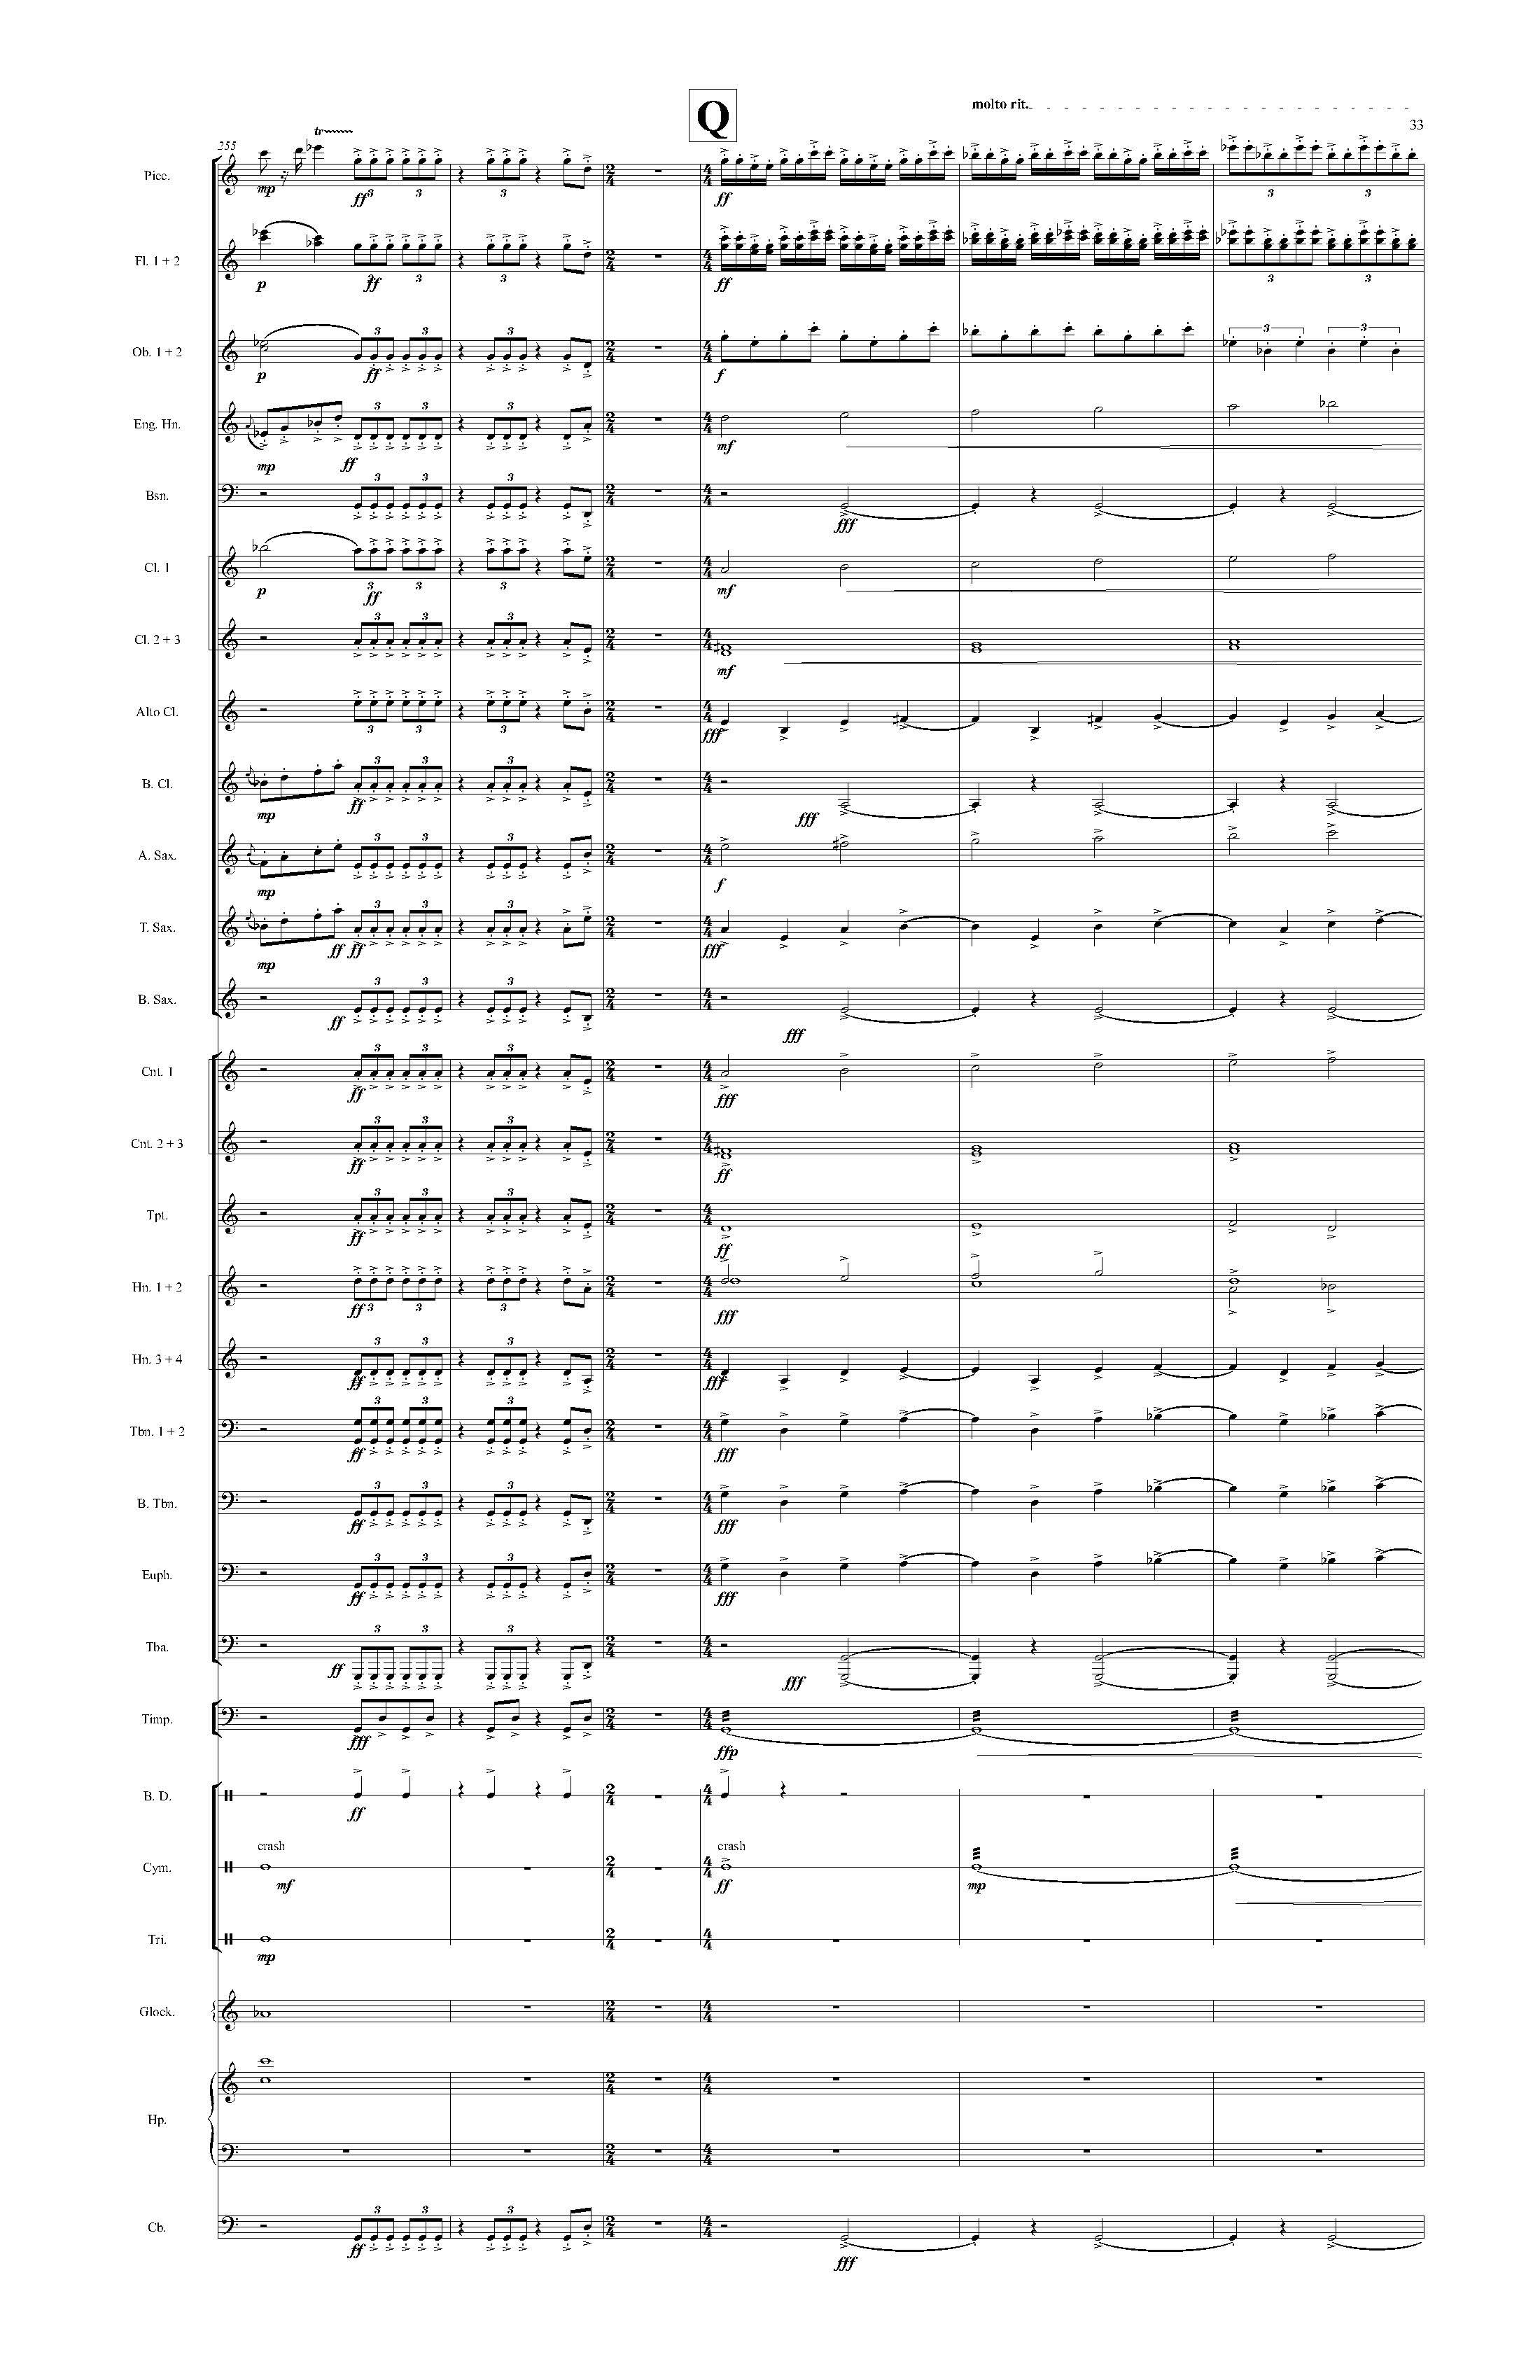 Psyche - Complete Score_Page_39.jpg